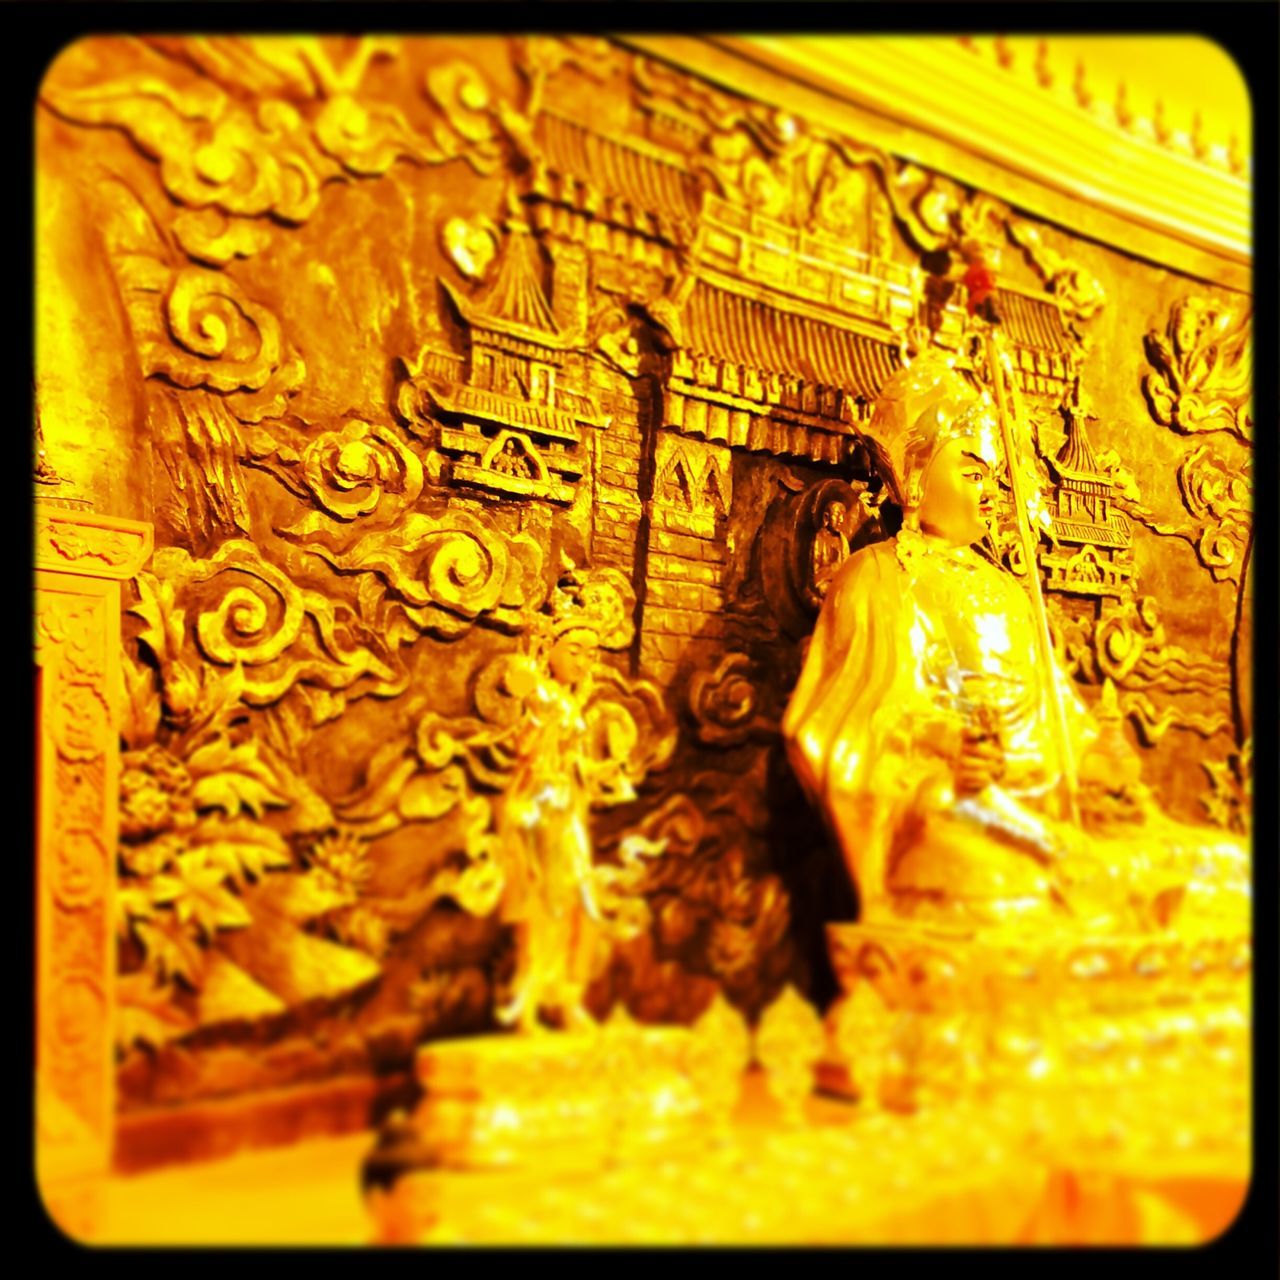 transfer print, indoors, auto post production filter, art and craft, art, yellow, creativity, close-up, human representation, statue, carving - craft product, sculpture, no people, gold colored, ornate, religion, detail, selective focus, spirituality